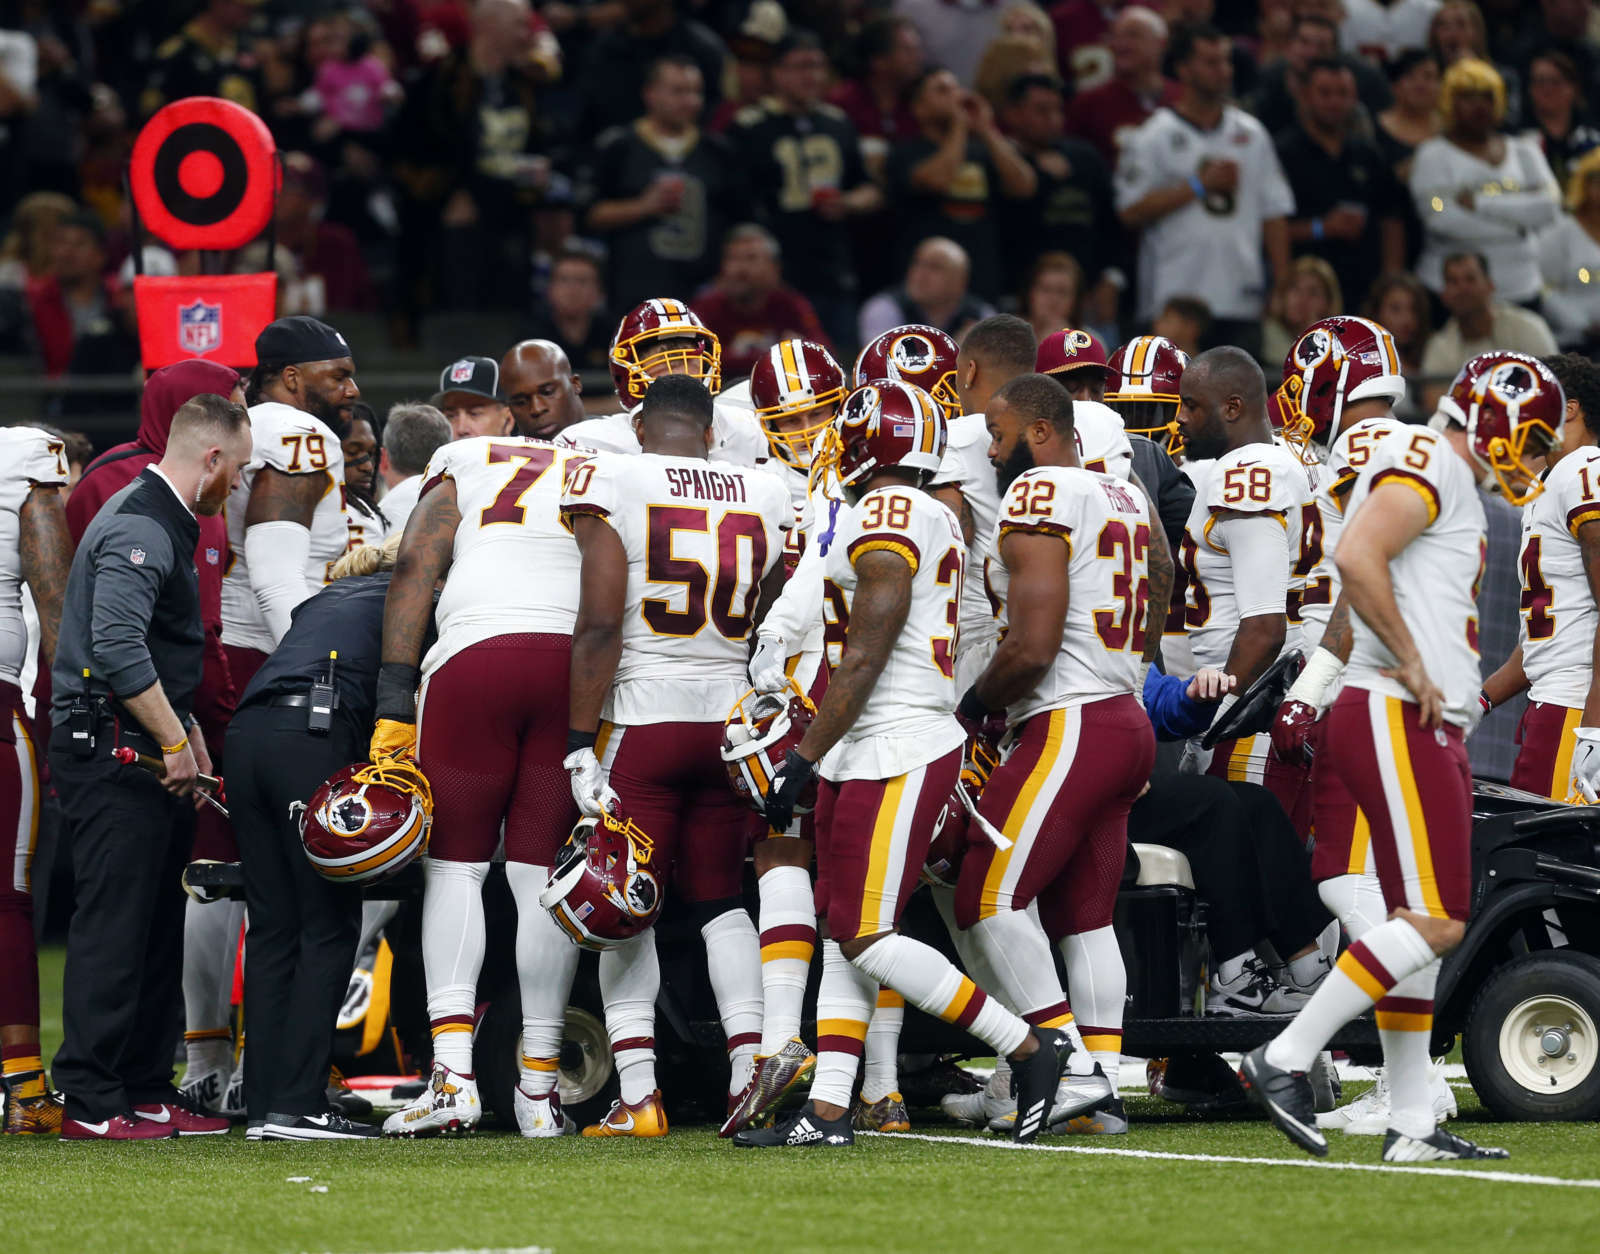 Teammates crowd around Washington Redskins running back Chris Thompson as he is helped onto a cart after being injured in the second half of an NFL football game against the New Orleans Saints in New Orleans, Sunday, Nov. 19, 2017. (AP Photo/Butch Dill)